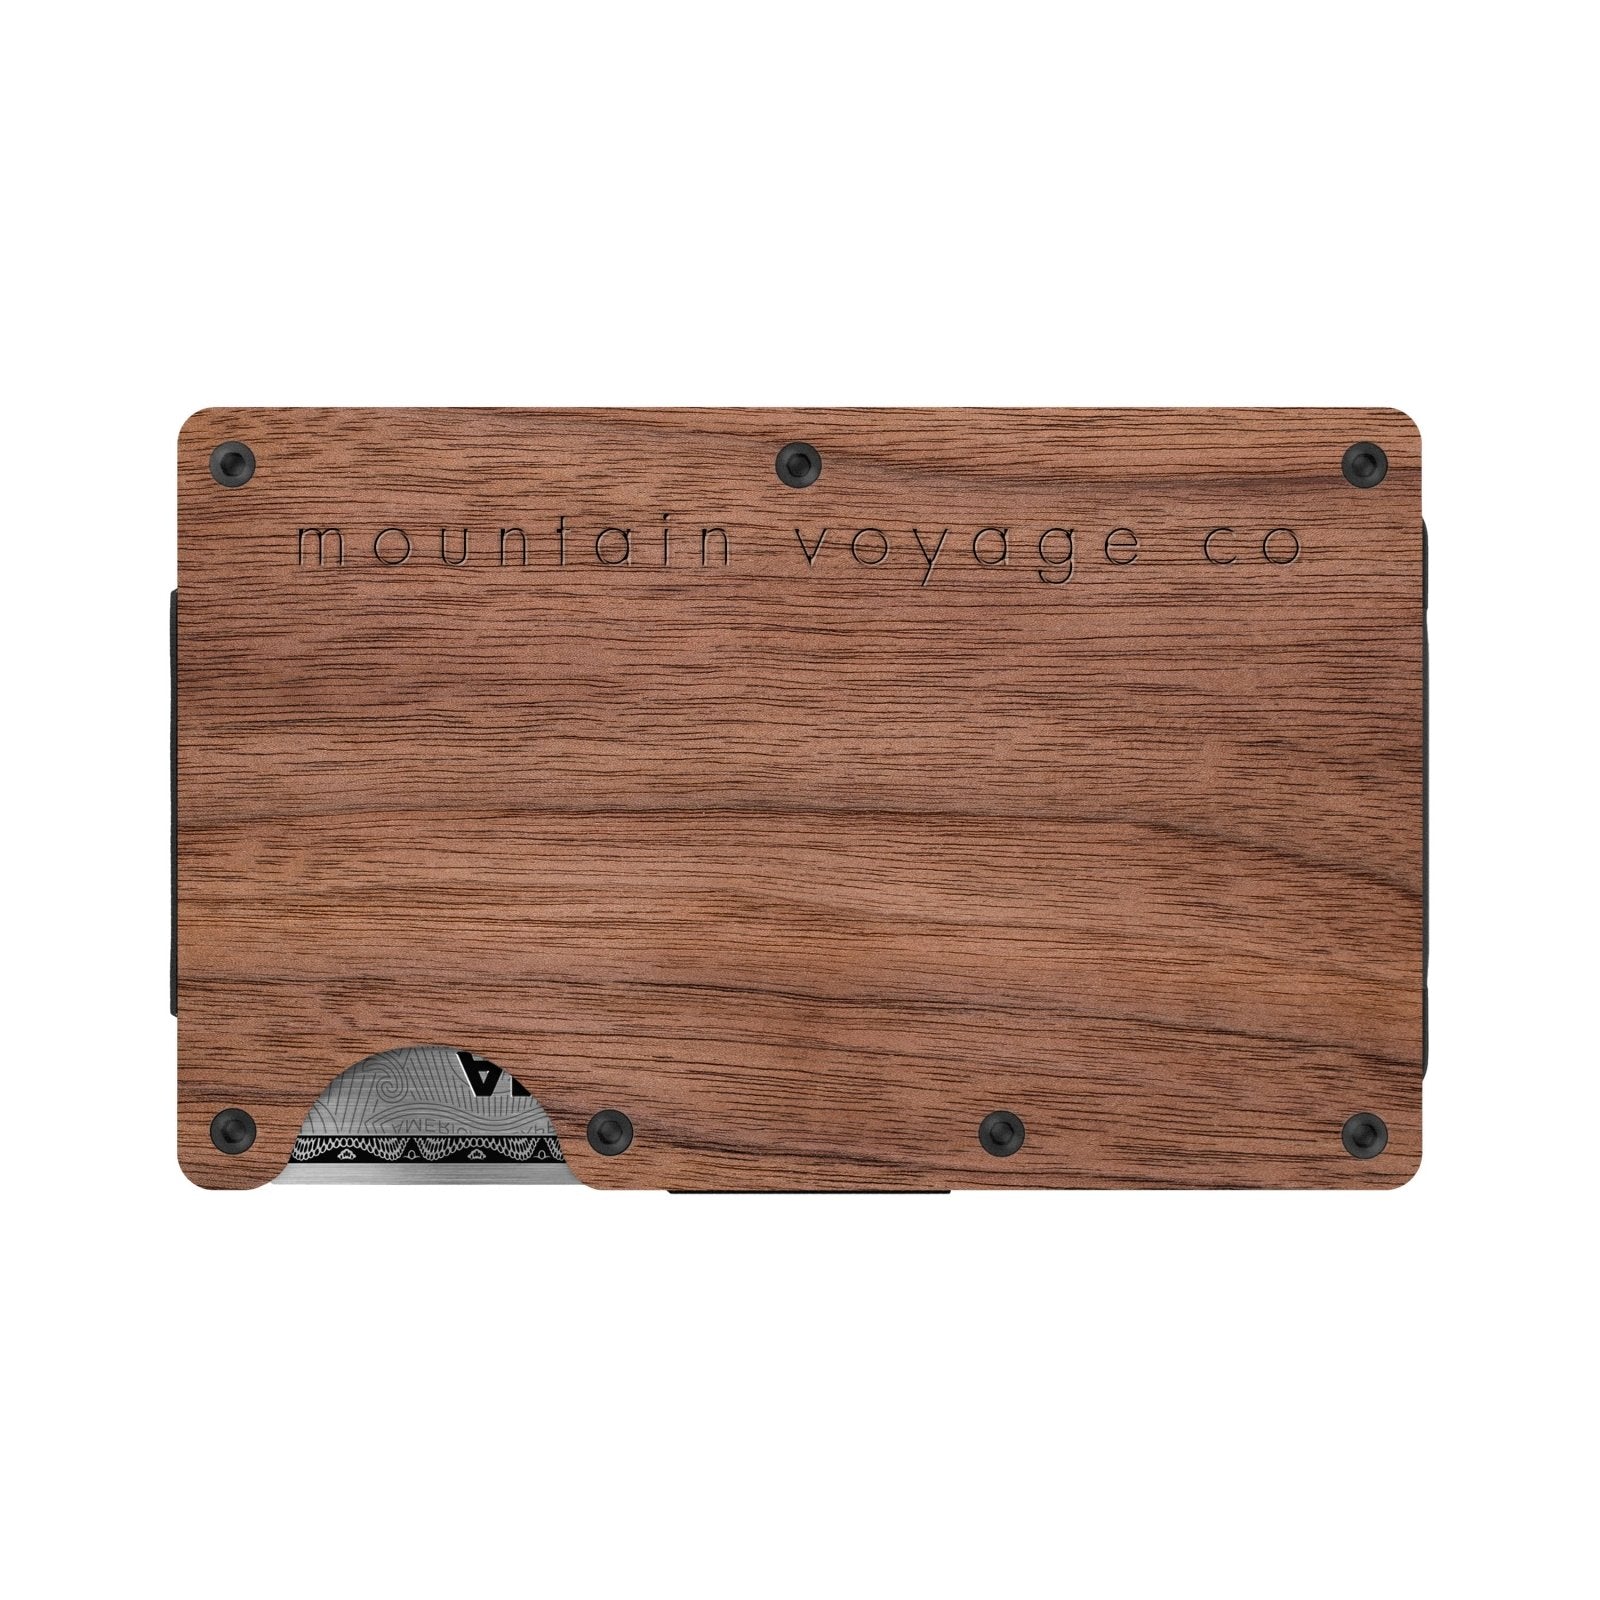 Mountain Voyage Wallet Review